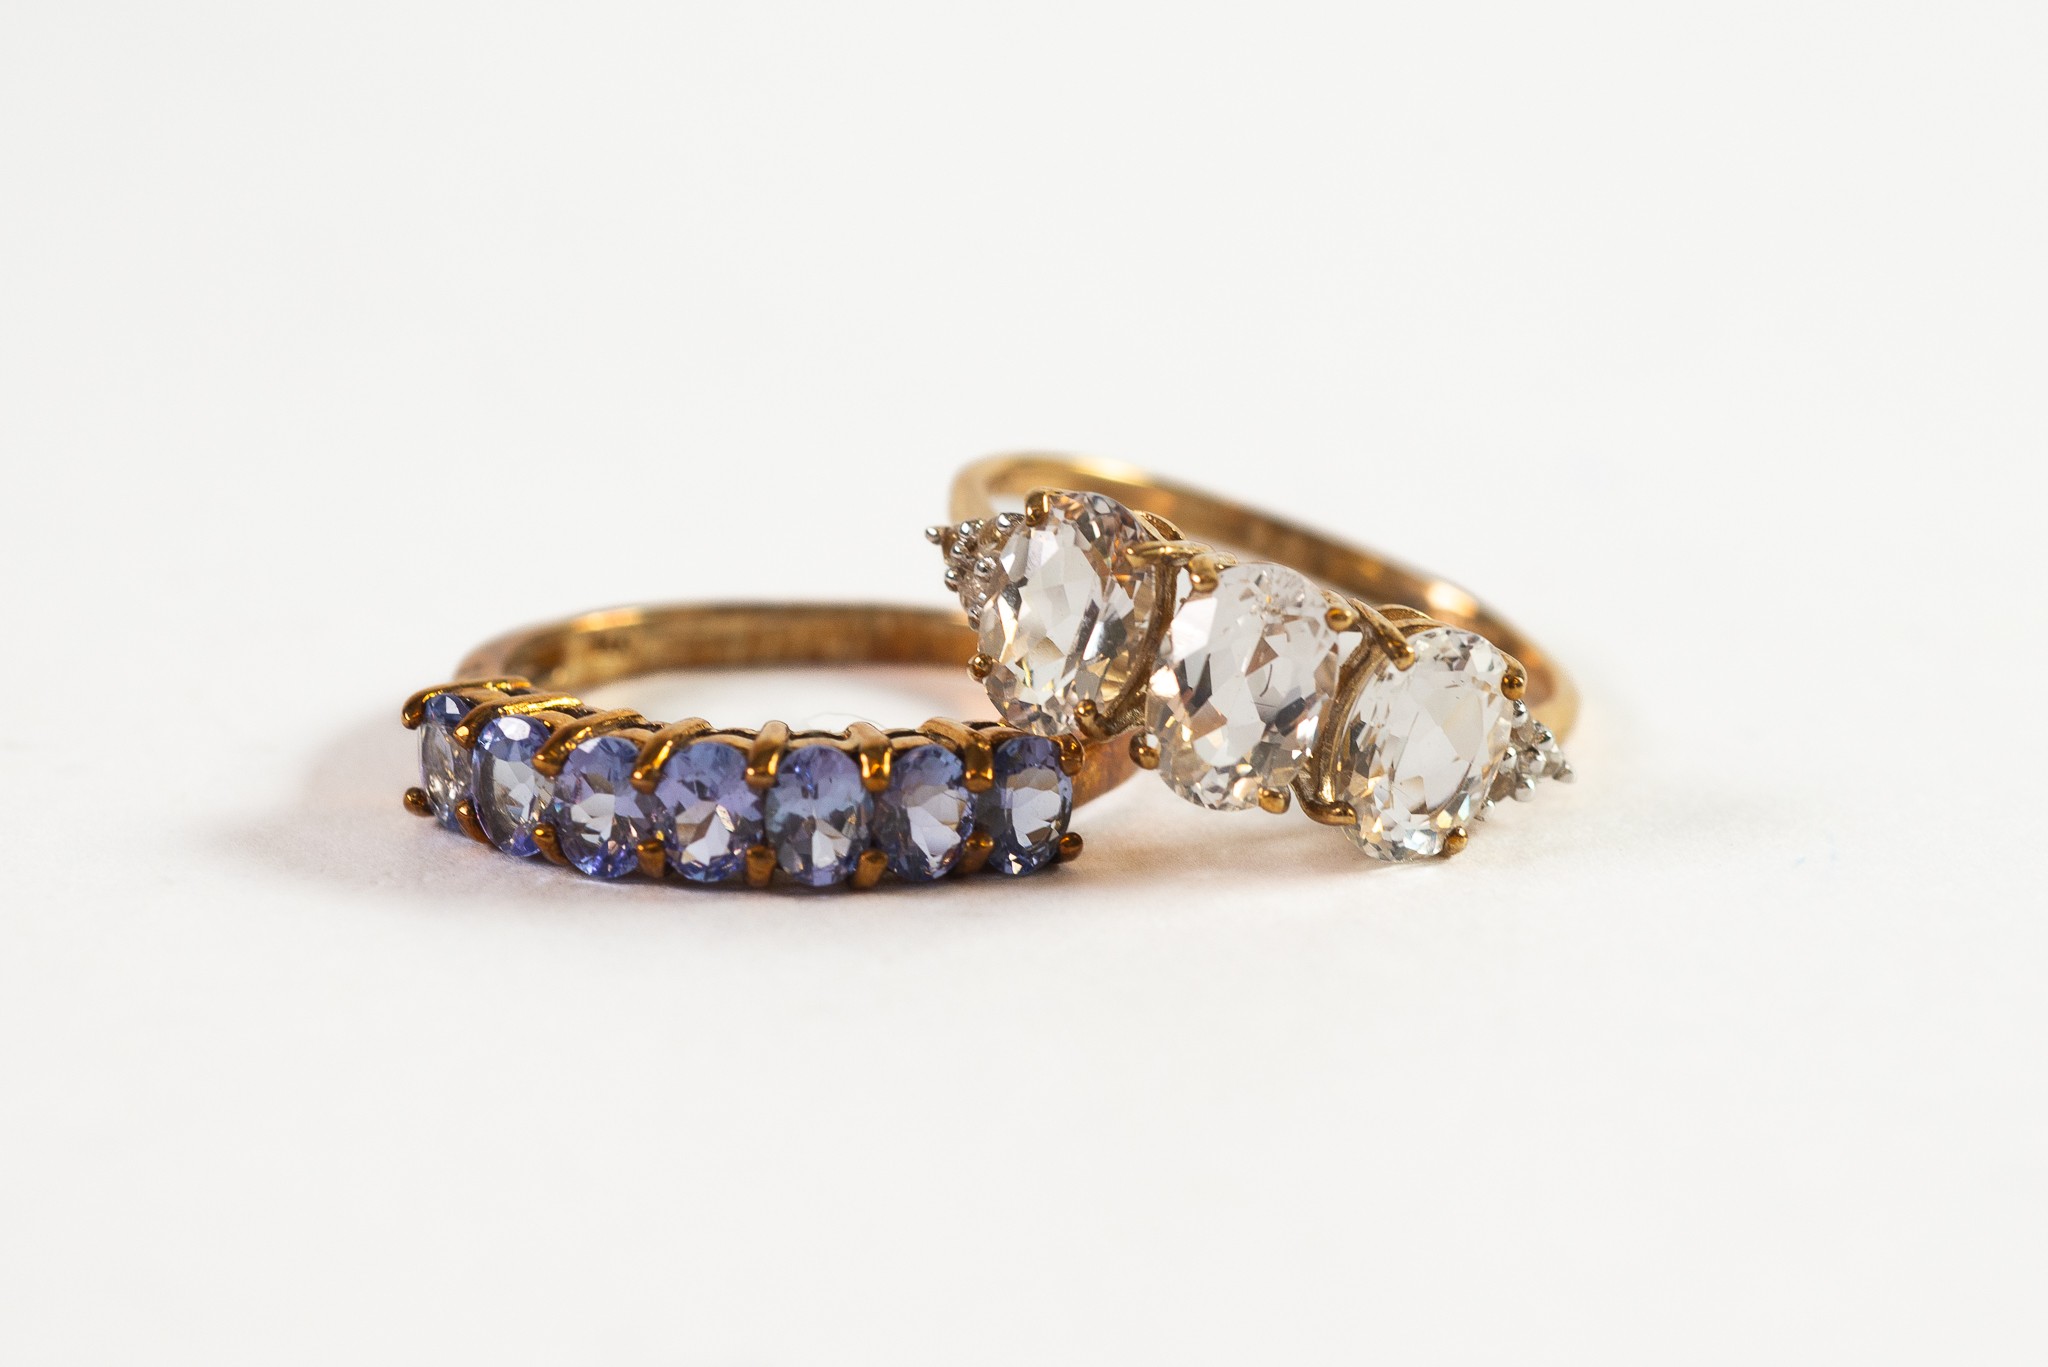 9ct GOLD RING set with a row of seven uniform tanzanite; and 9ct GOLD RING set with a row of three